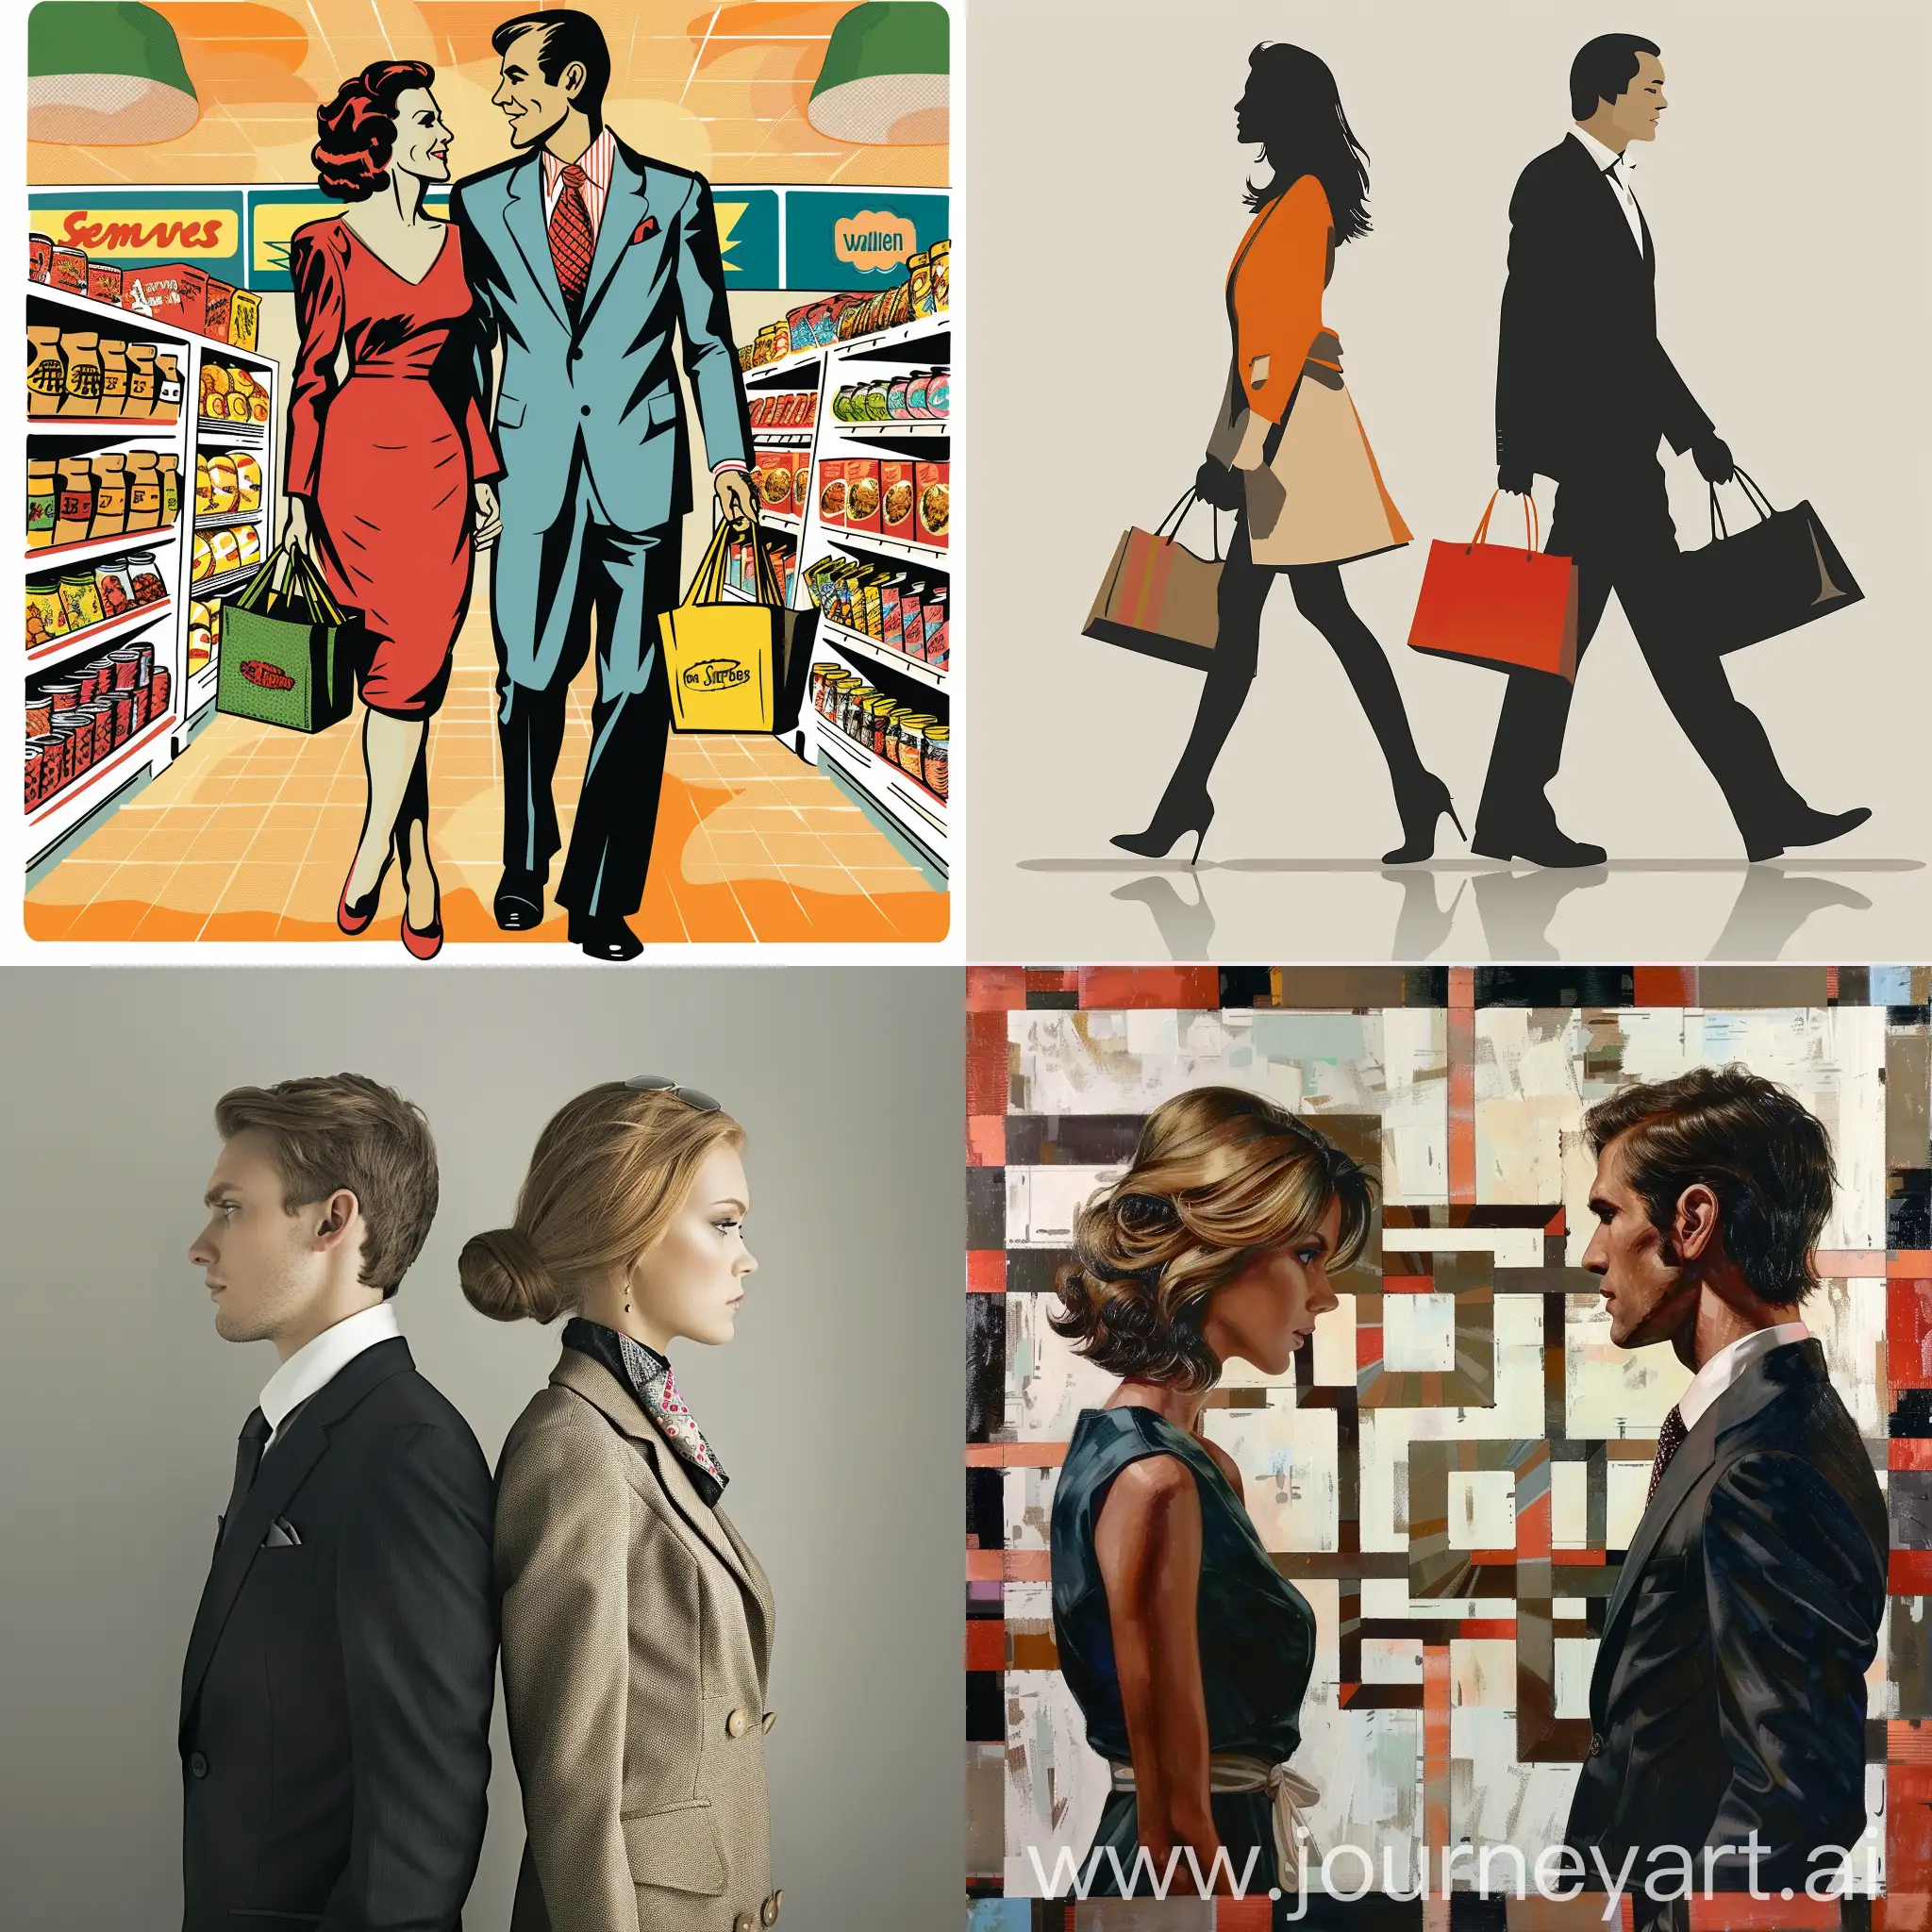 Strategic-Shopping-A-Comparative-Look-at-Men-and-Womens-DecisionMaking-in-Retail